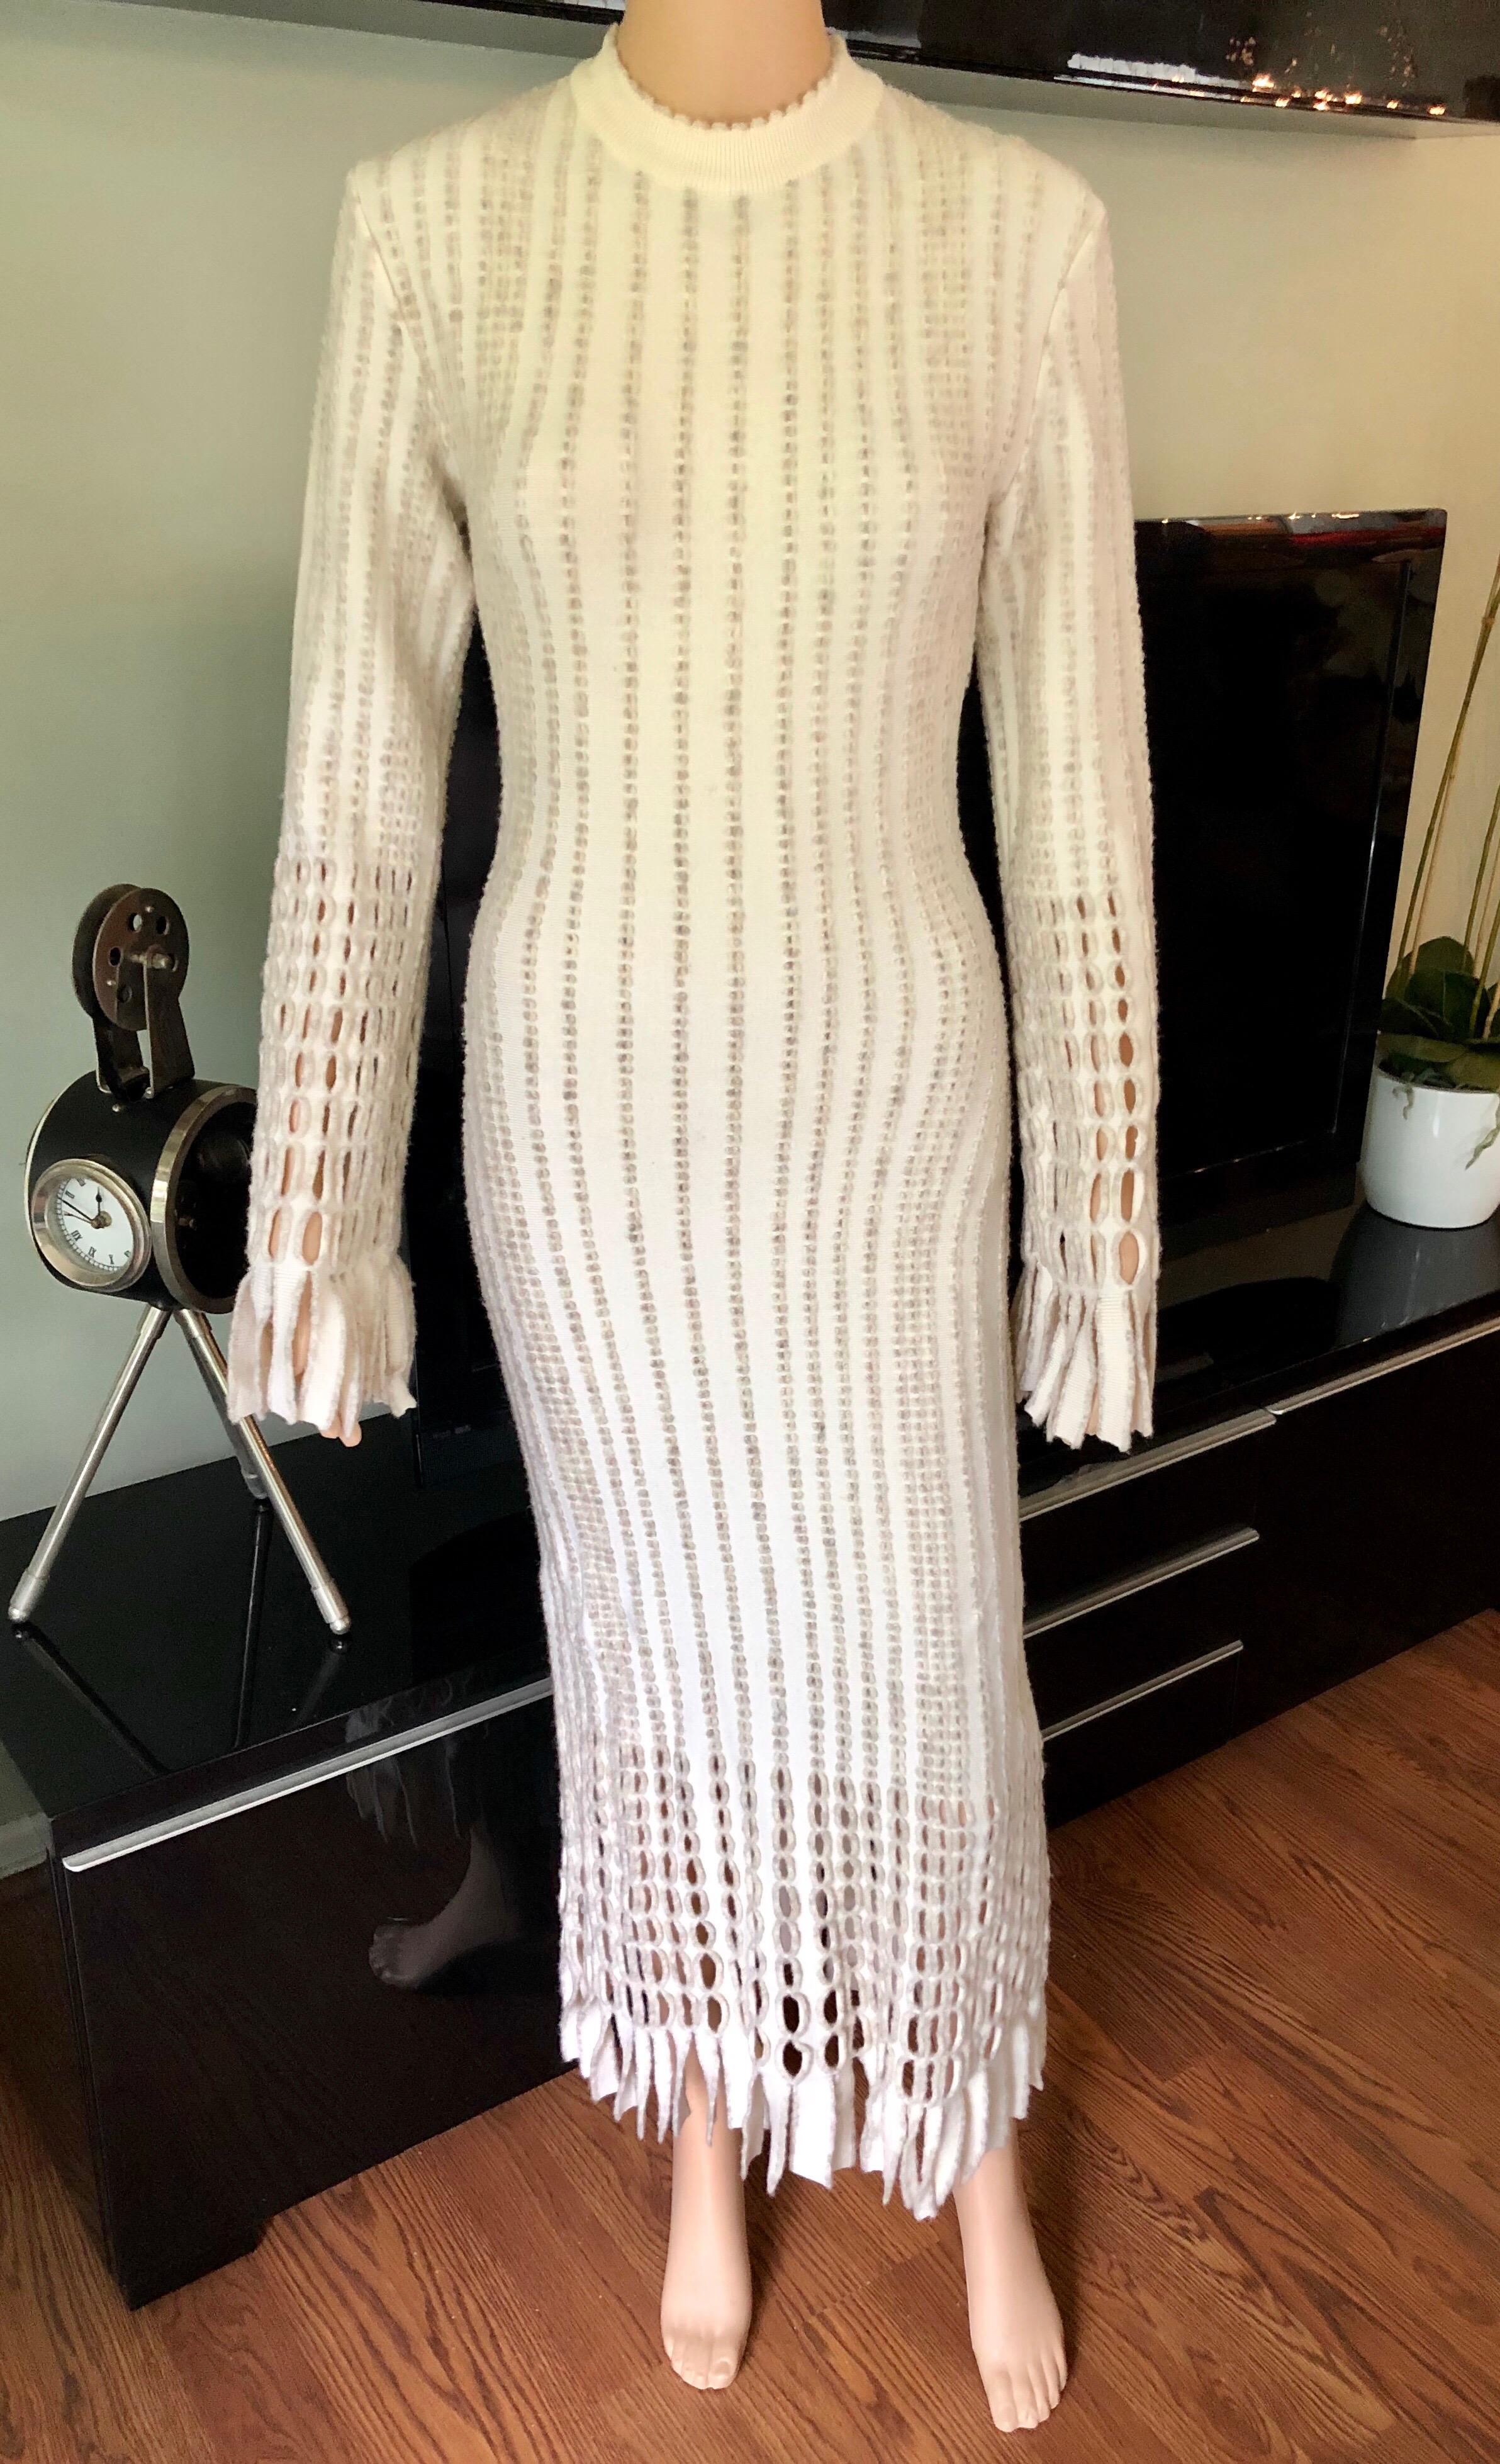 Azzedine Alaia 1990's Vintage Knit Fringed Laser Cut Midi Dress XS

Alaïa knit midi dress featuring fringe accents on the bottom and sleeves, crew neckline, long flared sleeves and concealed zip closure at center back.


